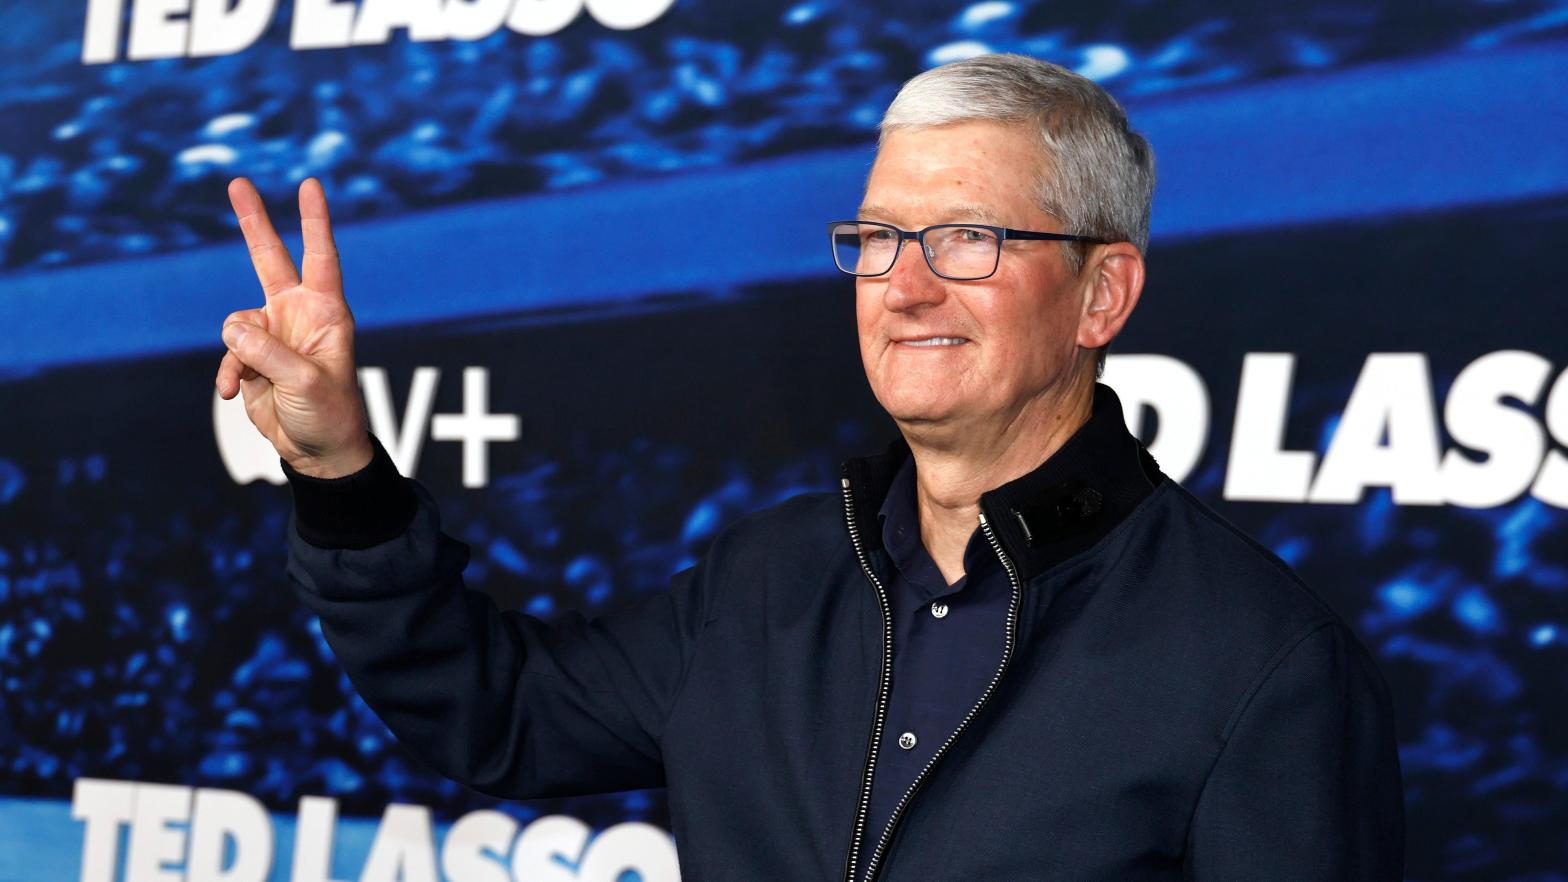 Apple CEO Tim Cook has recently called layoffs 'a last resort kind of thing.' (Photo: Frazer Harrison, Getty Images)